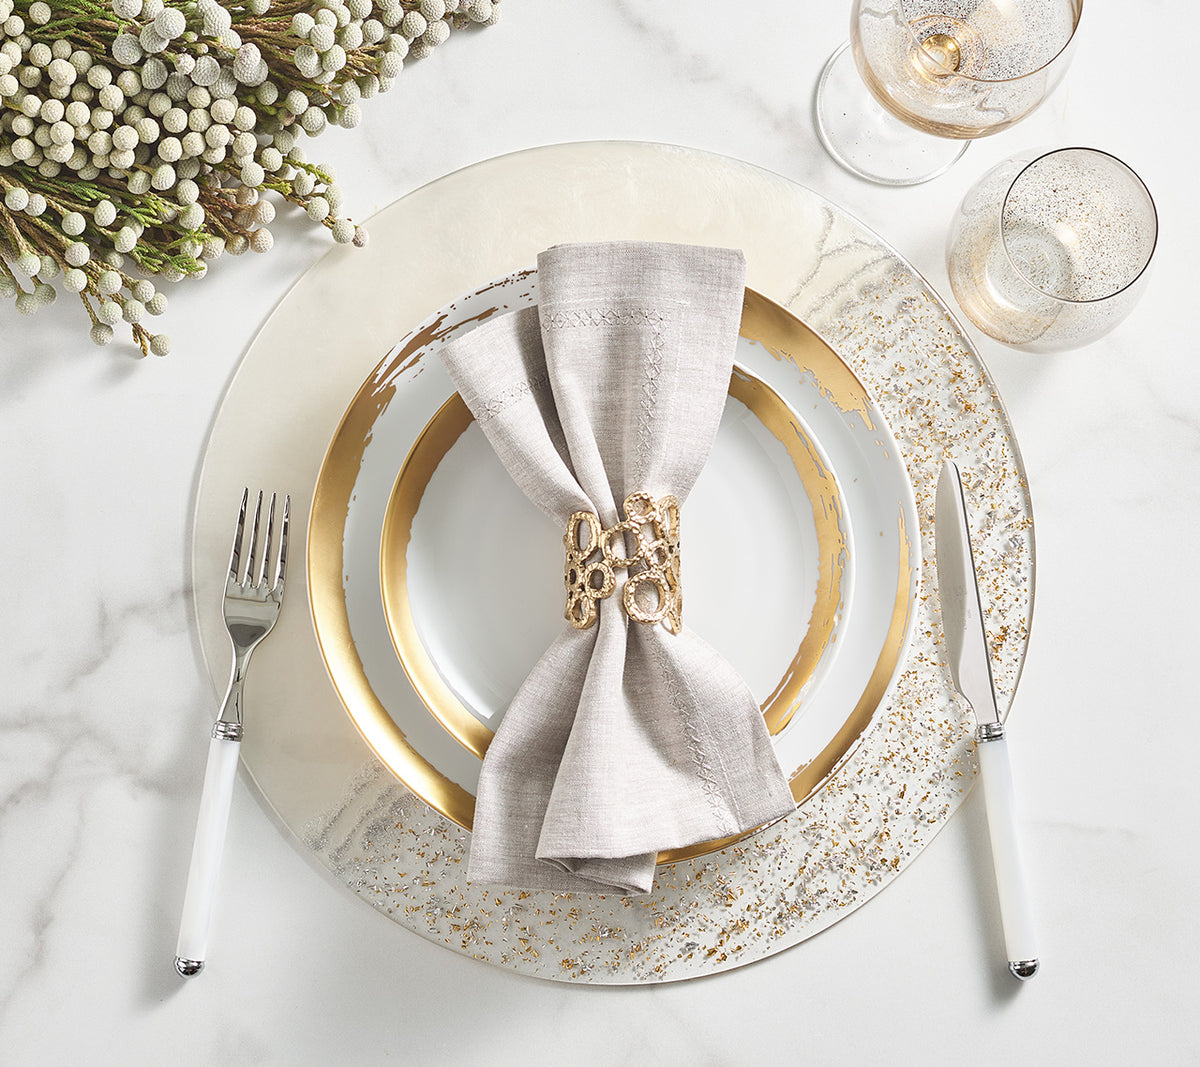 Milky Way Placemat in Ivory & Gold, Set of 4